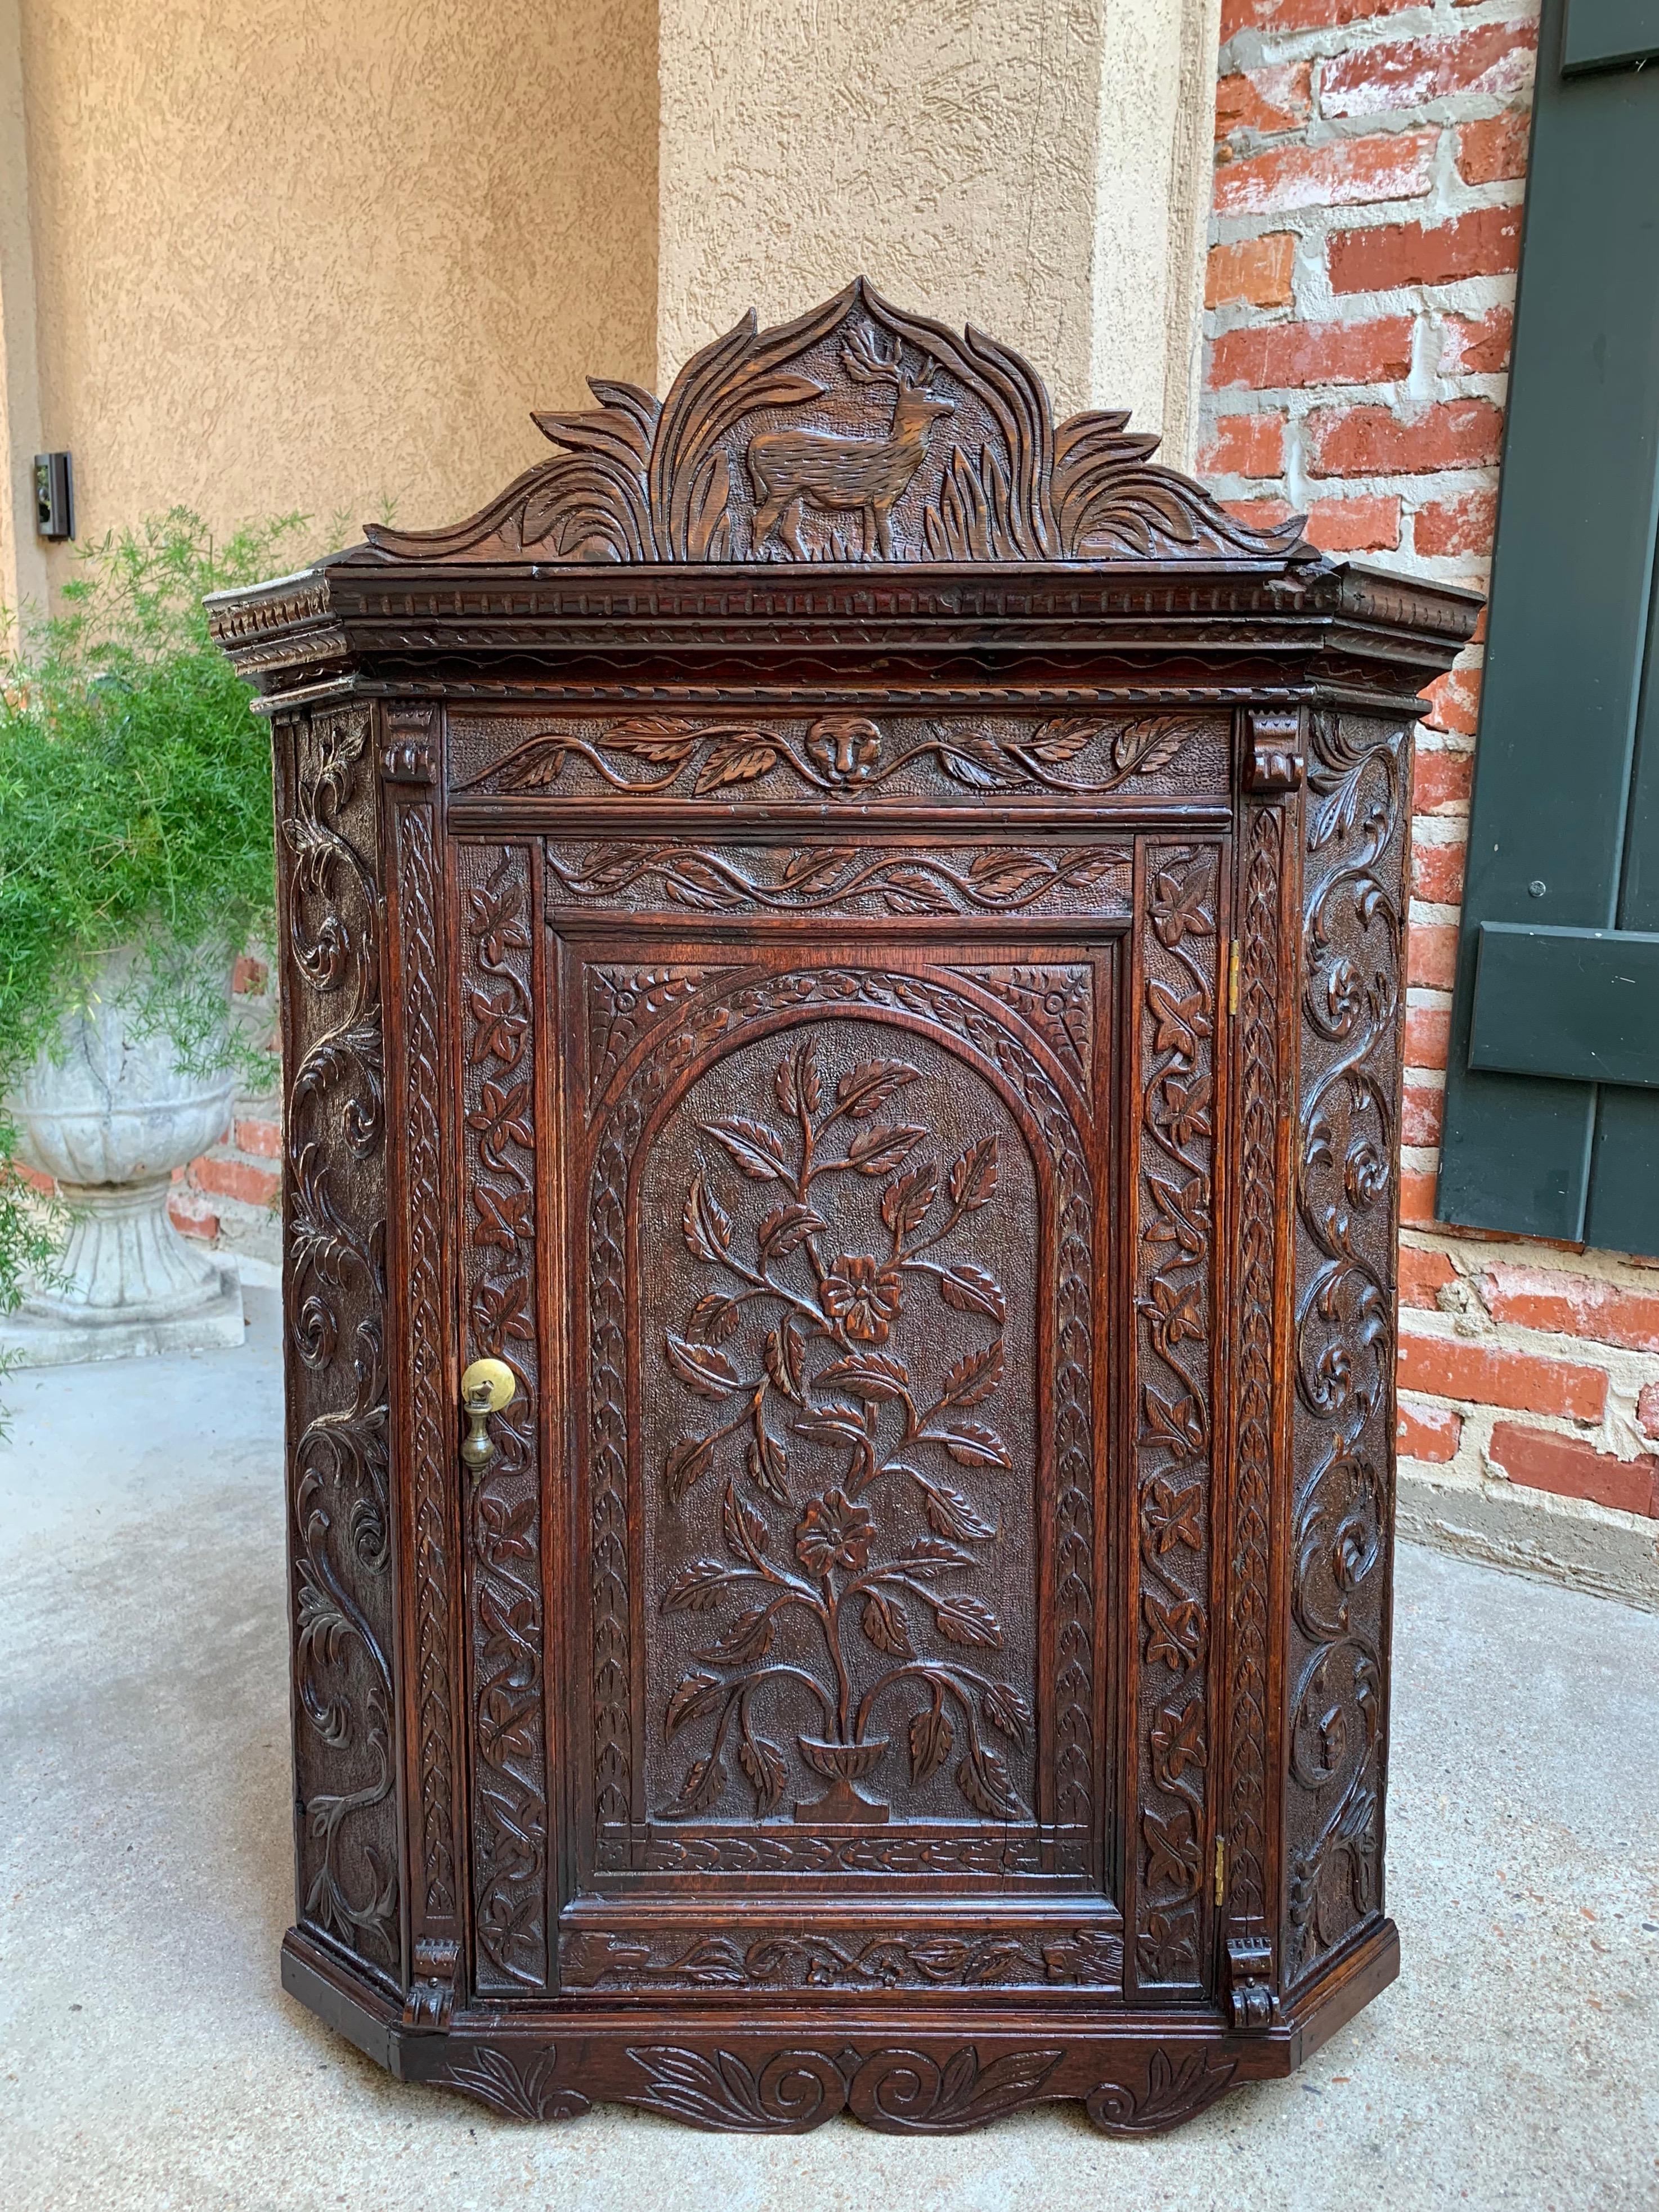 ~ Direct from England
~ Gorgeous antique English oak carved corner wall cabinet
~ Very old, hand carved designs on all the surfaces!
~ Upper crown has carved stag with antlers!
~ Hand carved designs across both sides
~ Paneled door has carved